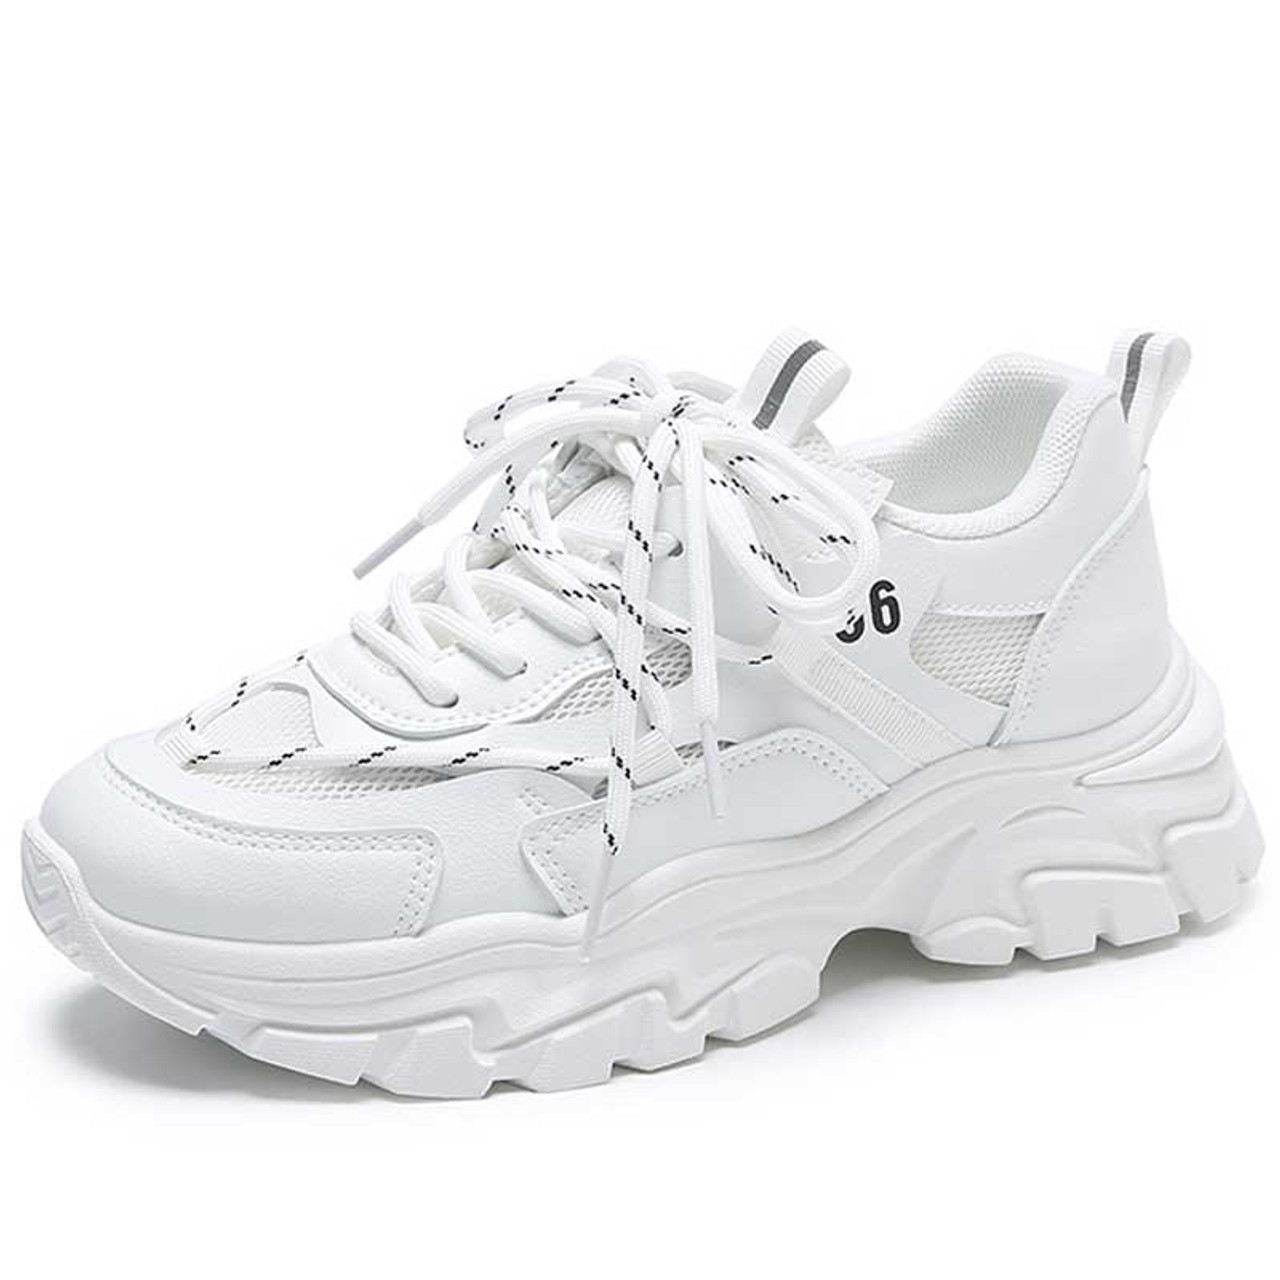 Chunky Sneakers  Lacing sneakers, Chunky sneakers, White casual shoes